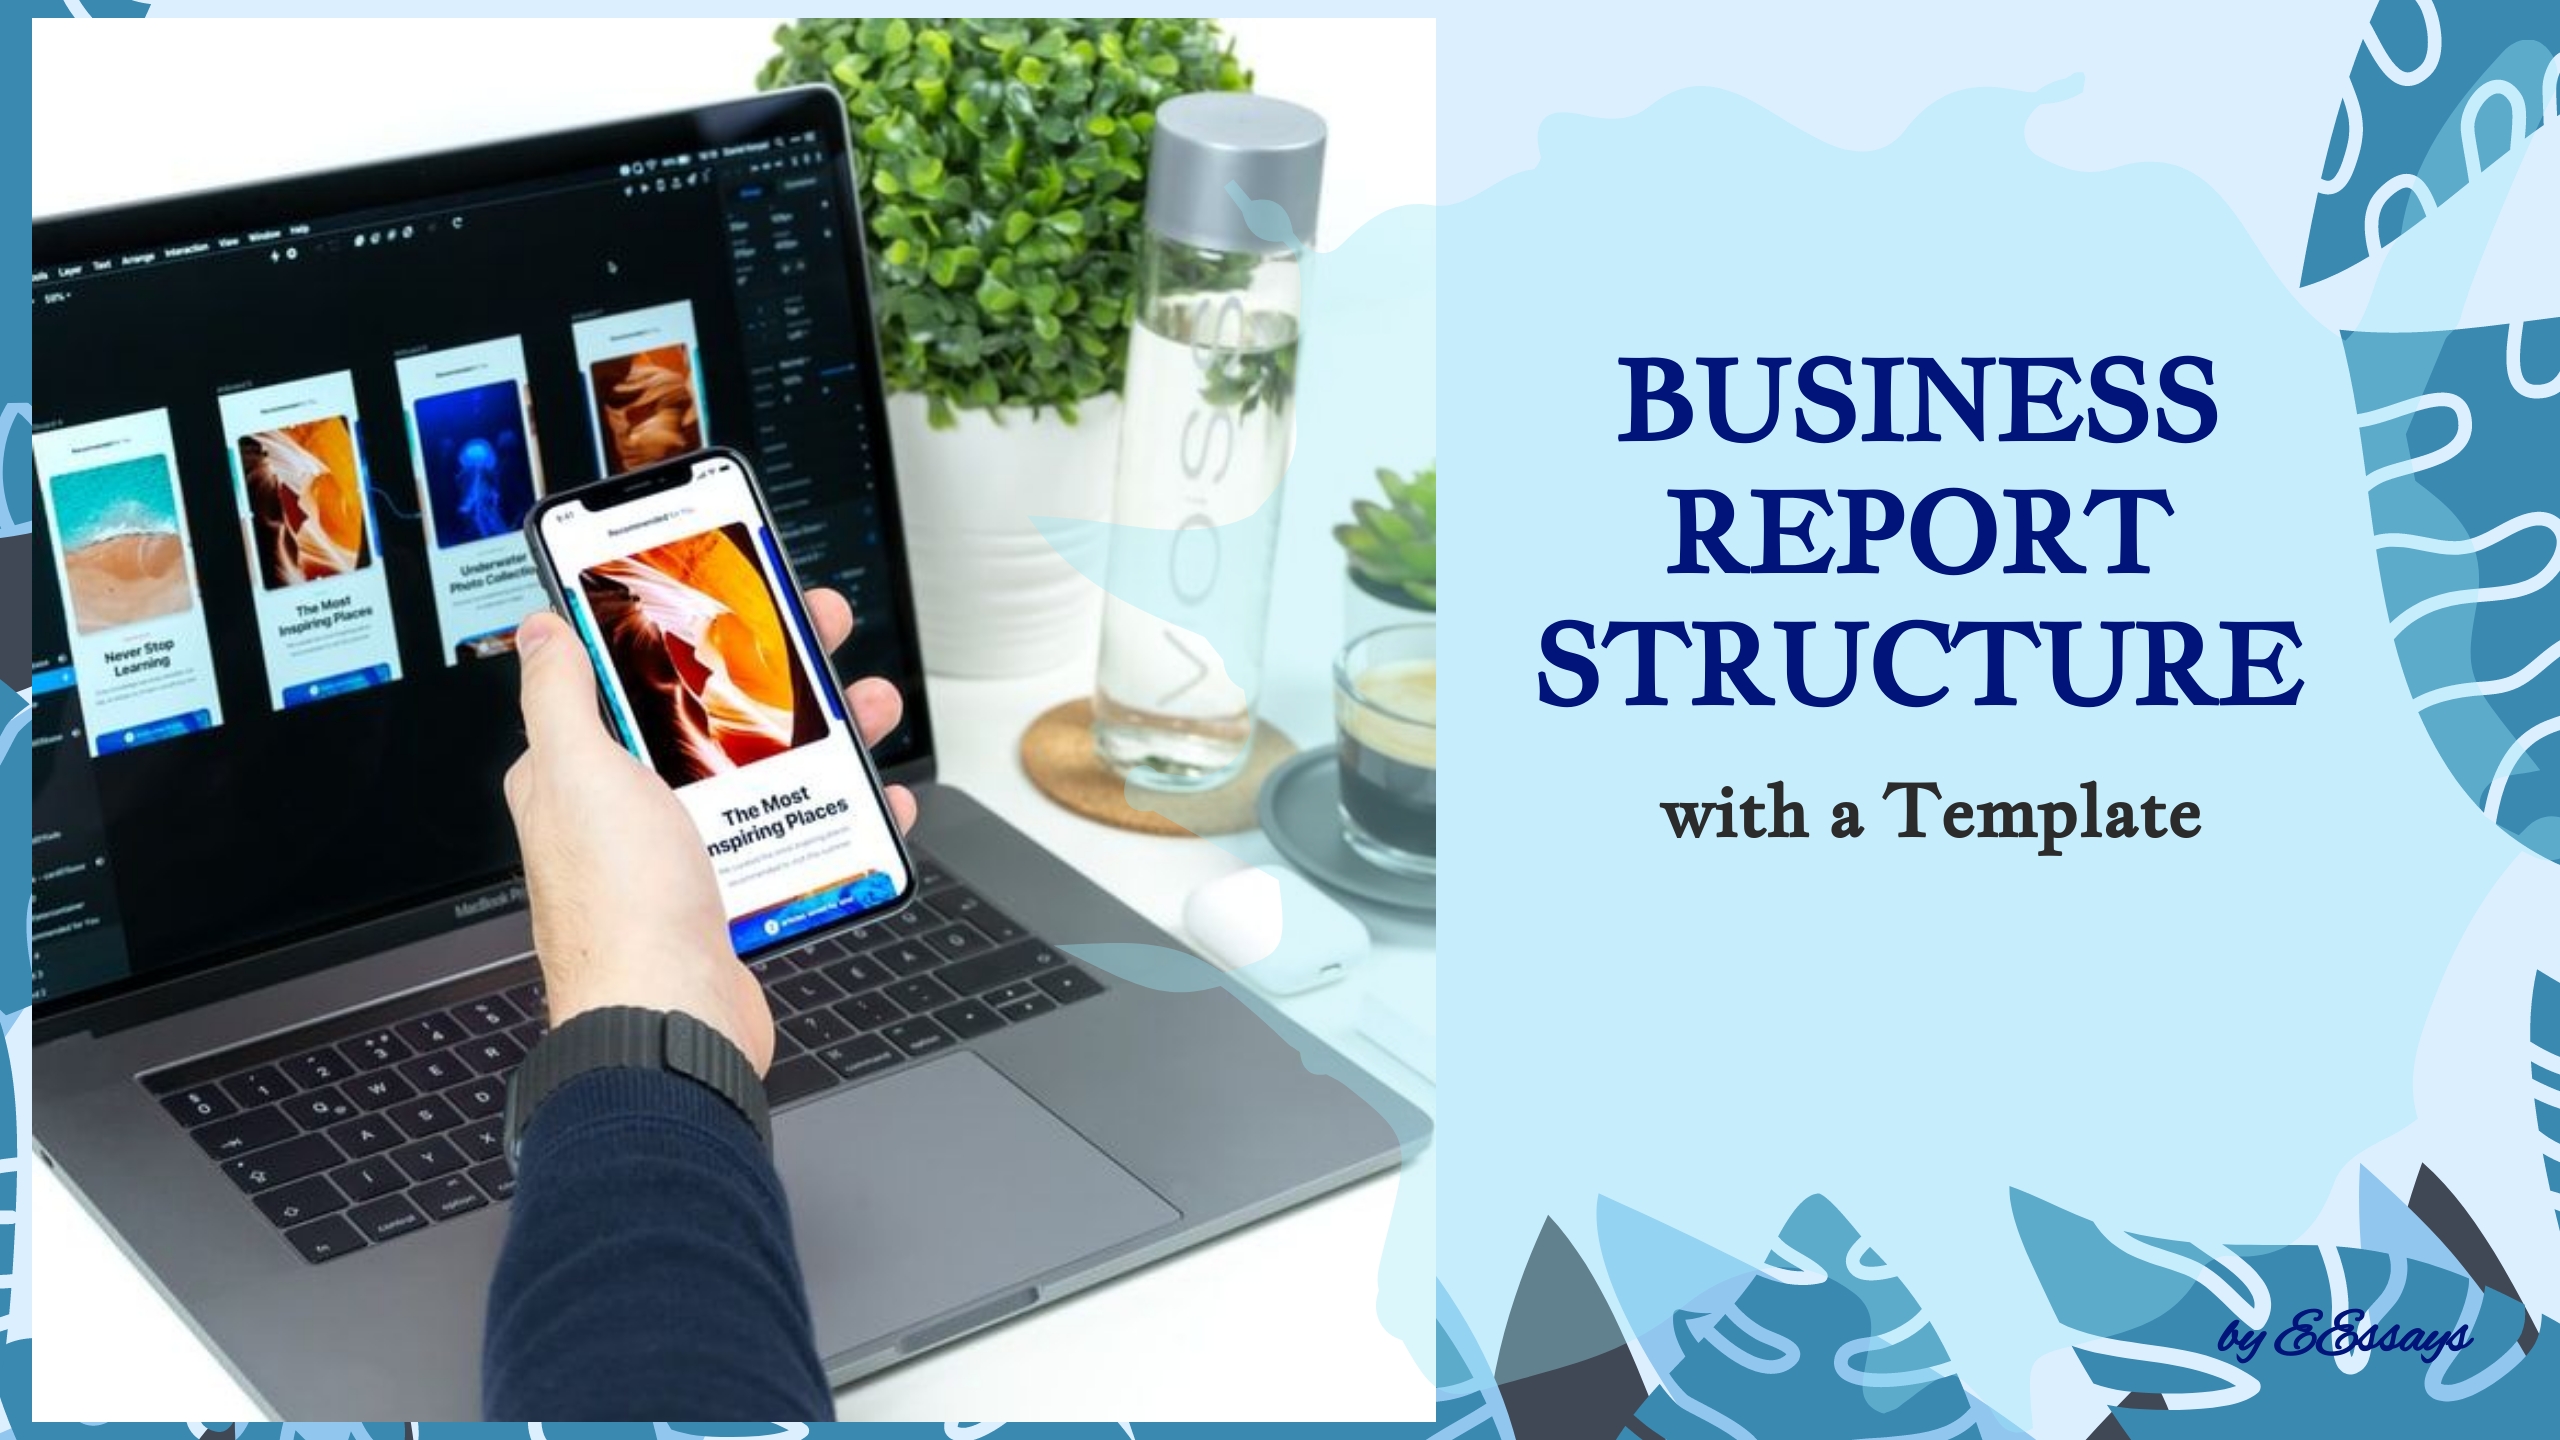 Business Report Structure: Executive Summary and Template